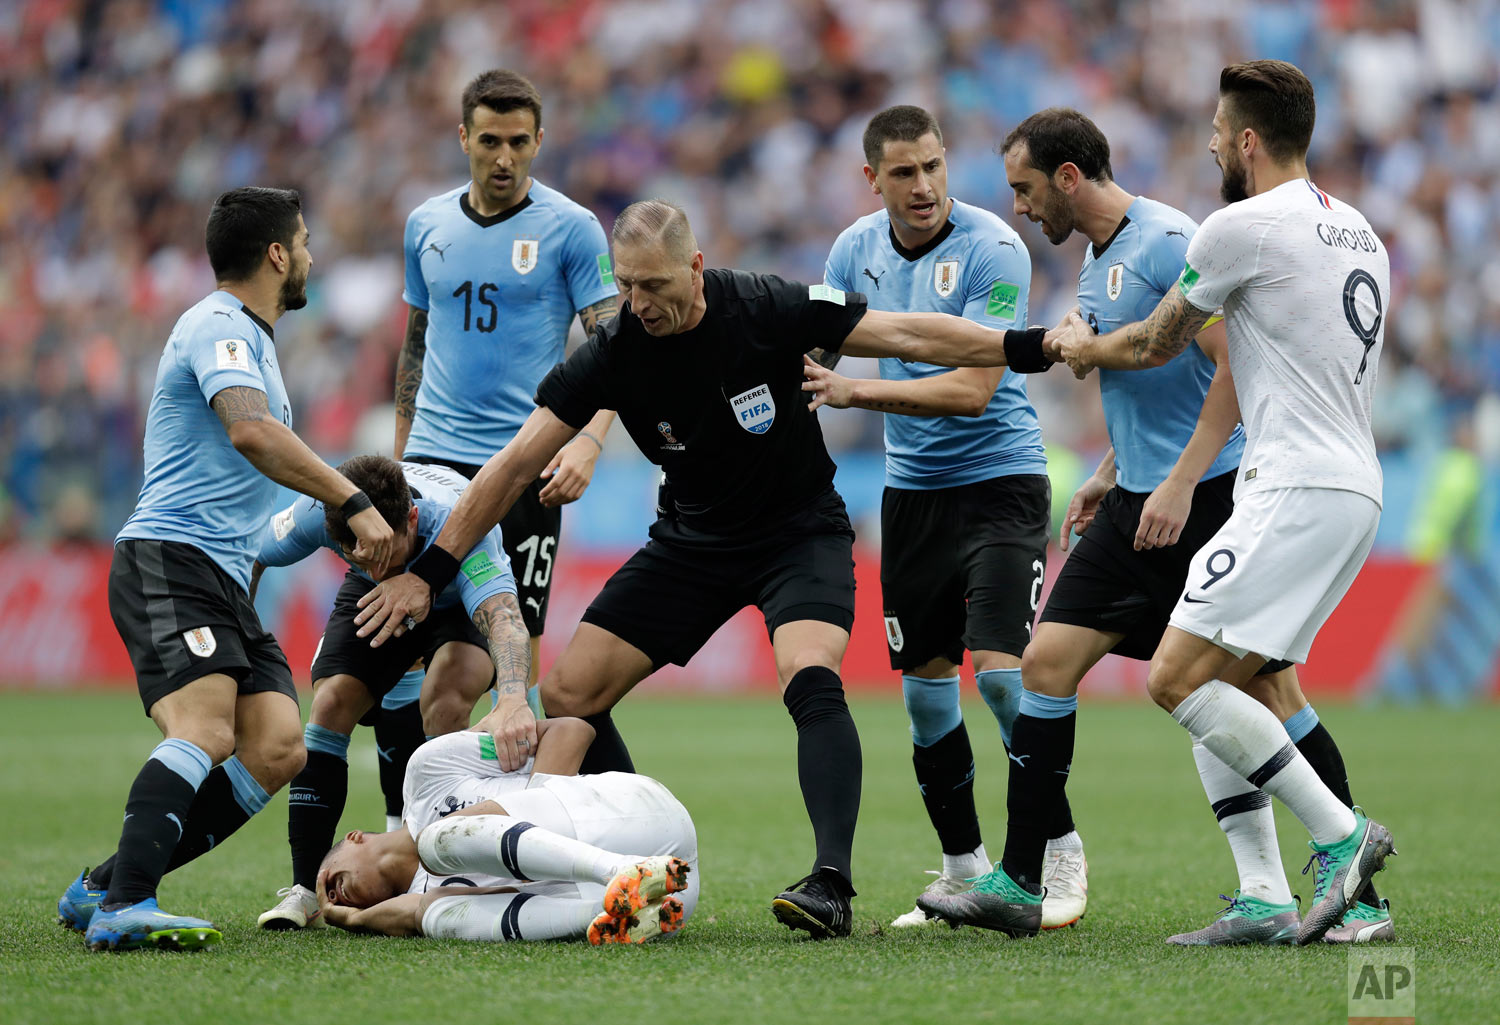  Uruguay players protest to referee Nestor Pitana of Argentina that France's Kylian Mbappe, on the ground, is overreacting after taking a dive during the quarterfinal match between Uruguay and France at the 2018 soccer World Cup in the Nizhny Novgoro